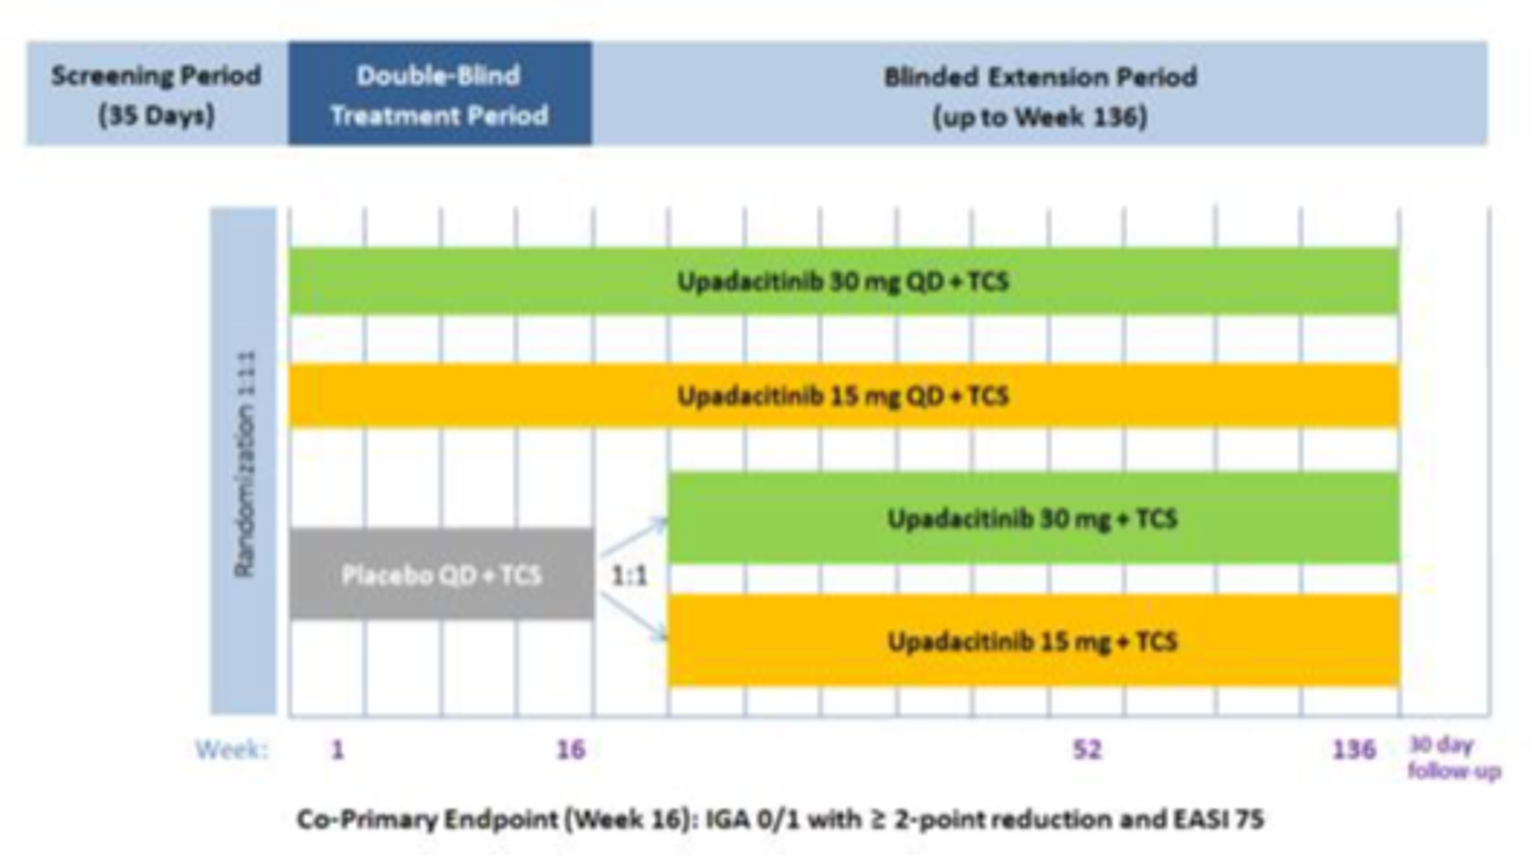 Figure depicts how included patients flow from screening period and randomization to upadacitinib 30 mg once daily plus topical corticosteroids, upadacitinib 15 mg once daily plus topical corticosteroids, and placebo during the double-blind period, then to a blinded extension period.